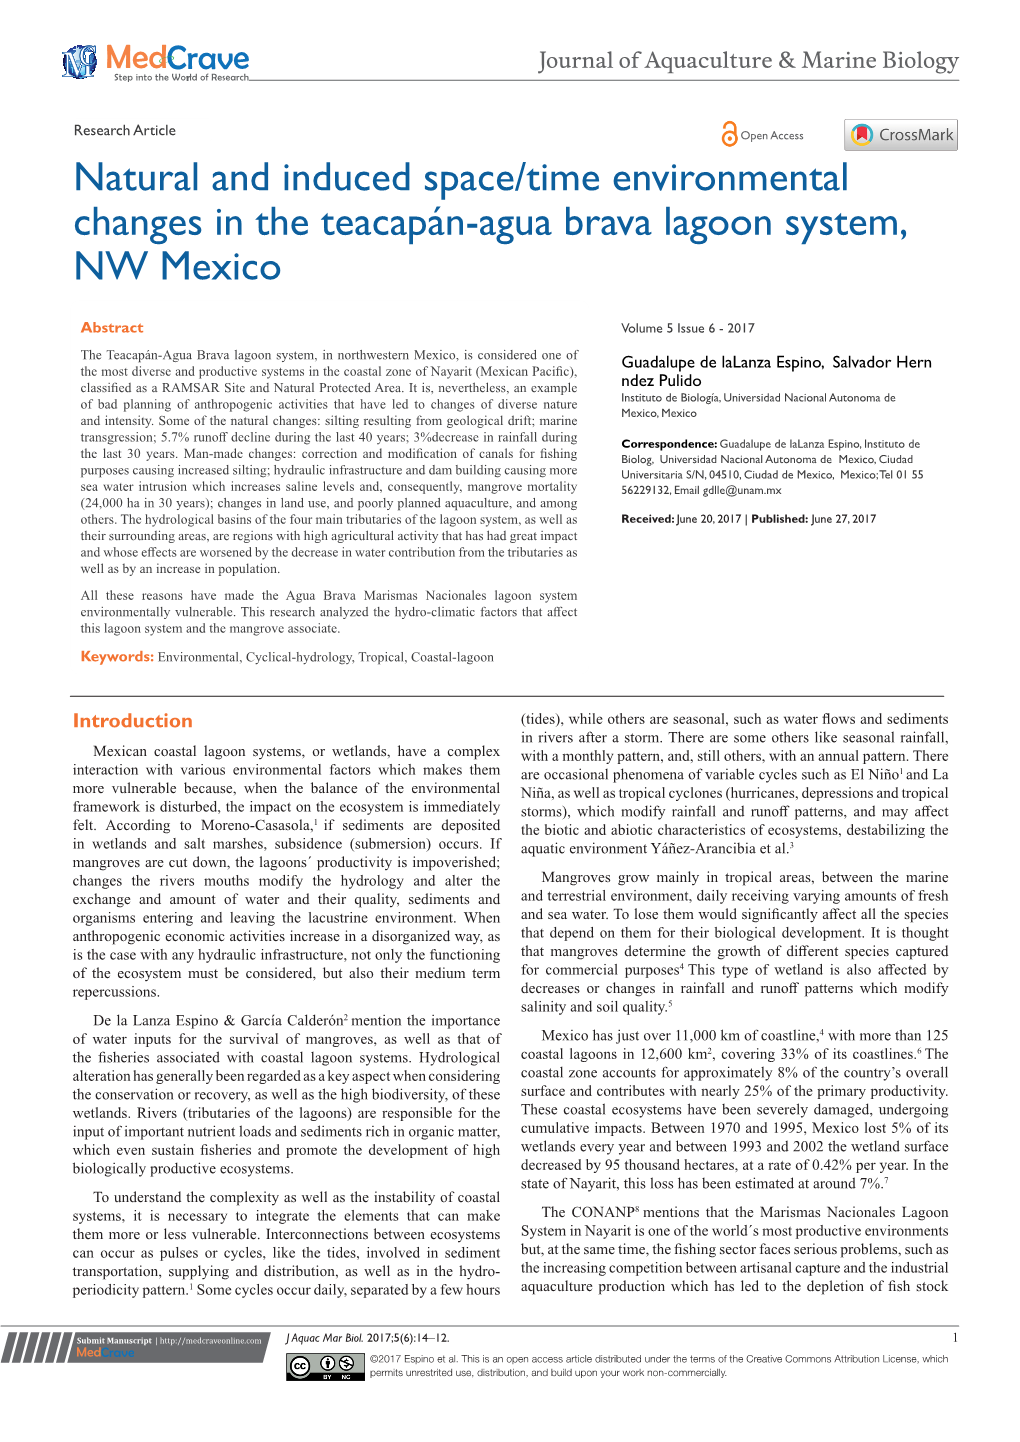 Natural and Induced Space/Time Environmental Changes in the Teacapán-Agua Brava Lagoon System, NW Mexico